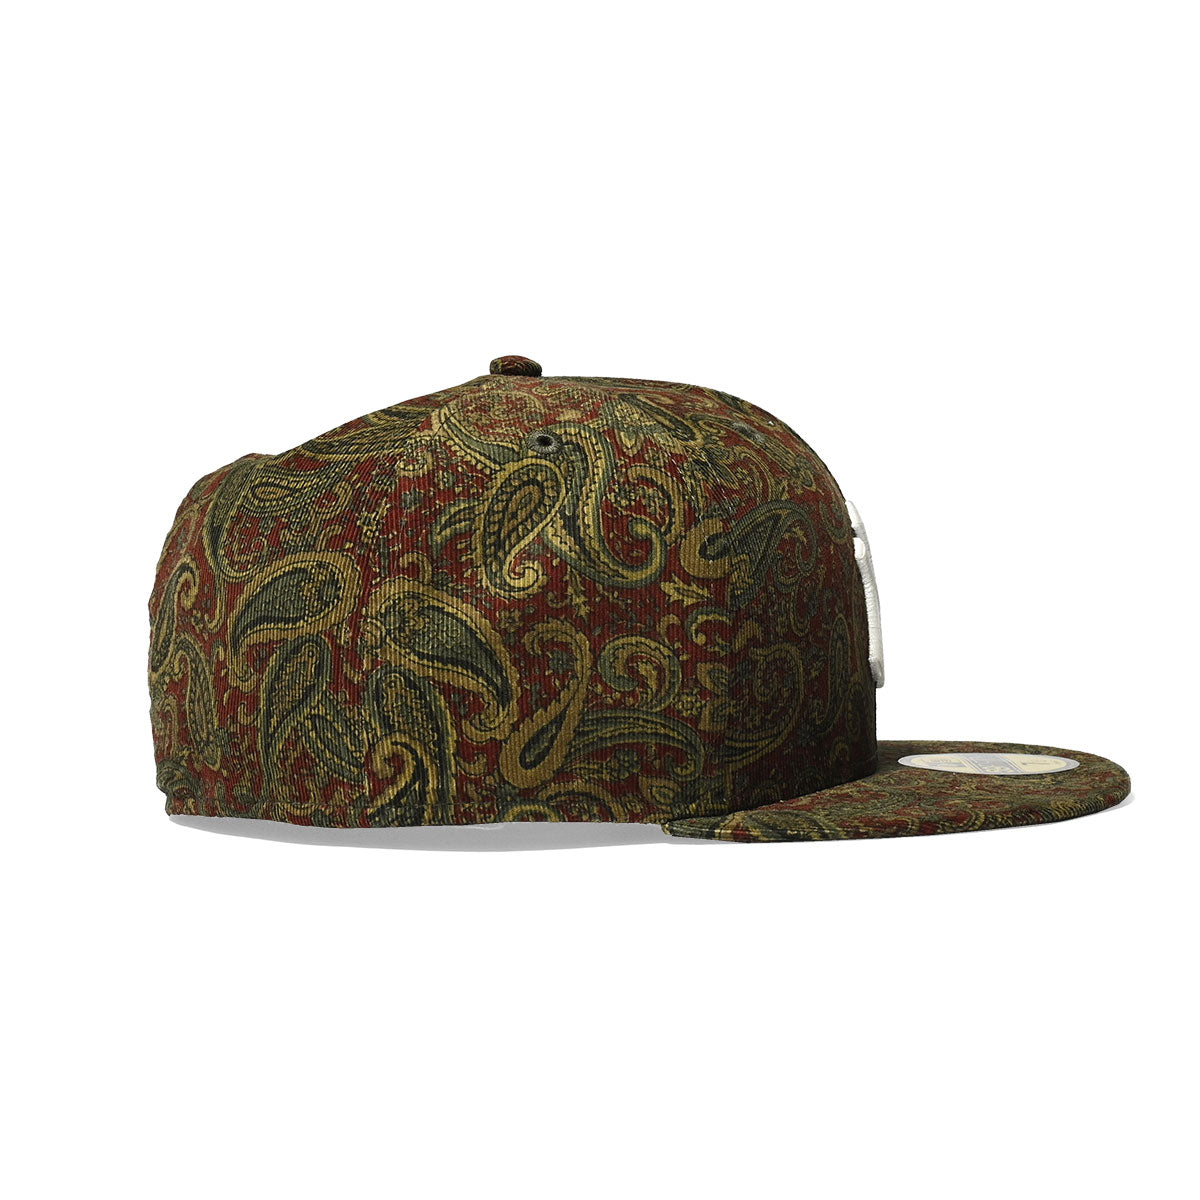 NEW ERA New York Yankees - 59FIFTY TRADITIONAL PACK PAISLEY【14122478】